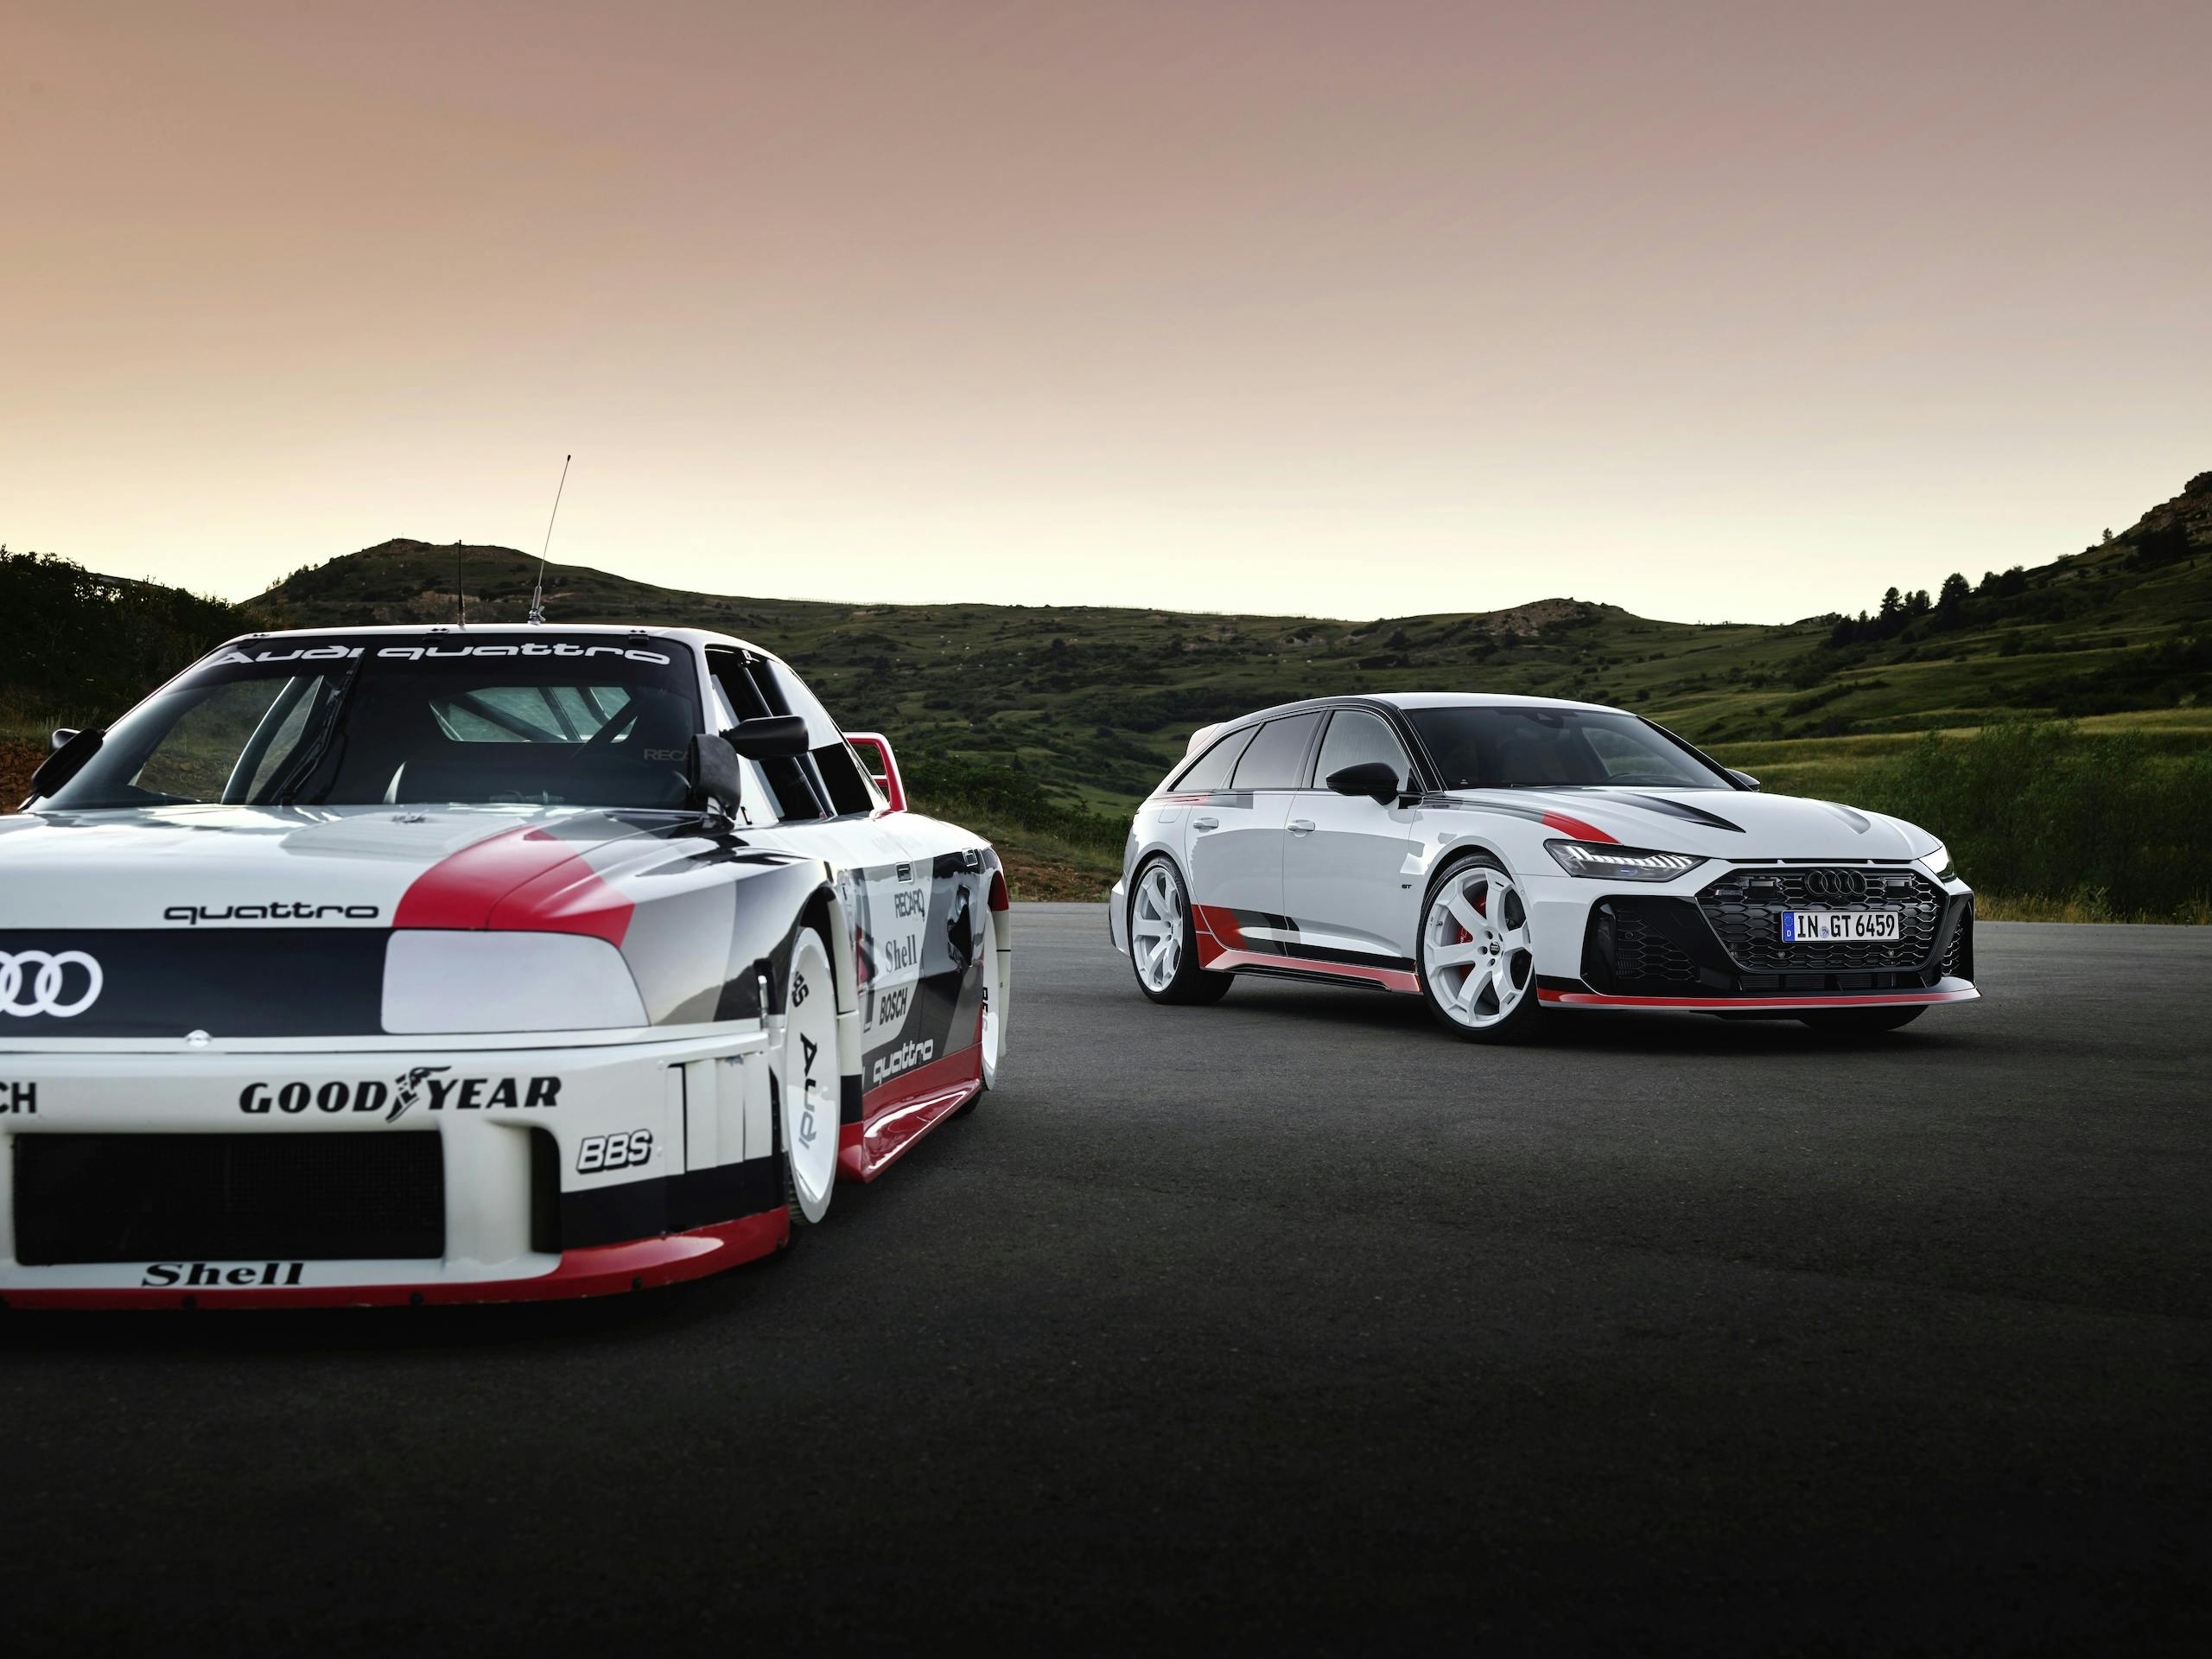 Audi RS 6 Avant GT with RS 6 GTO concept car fronts